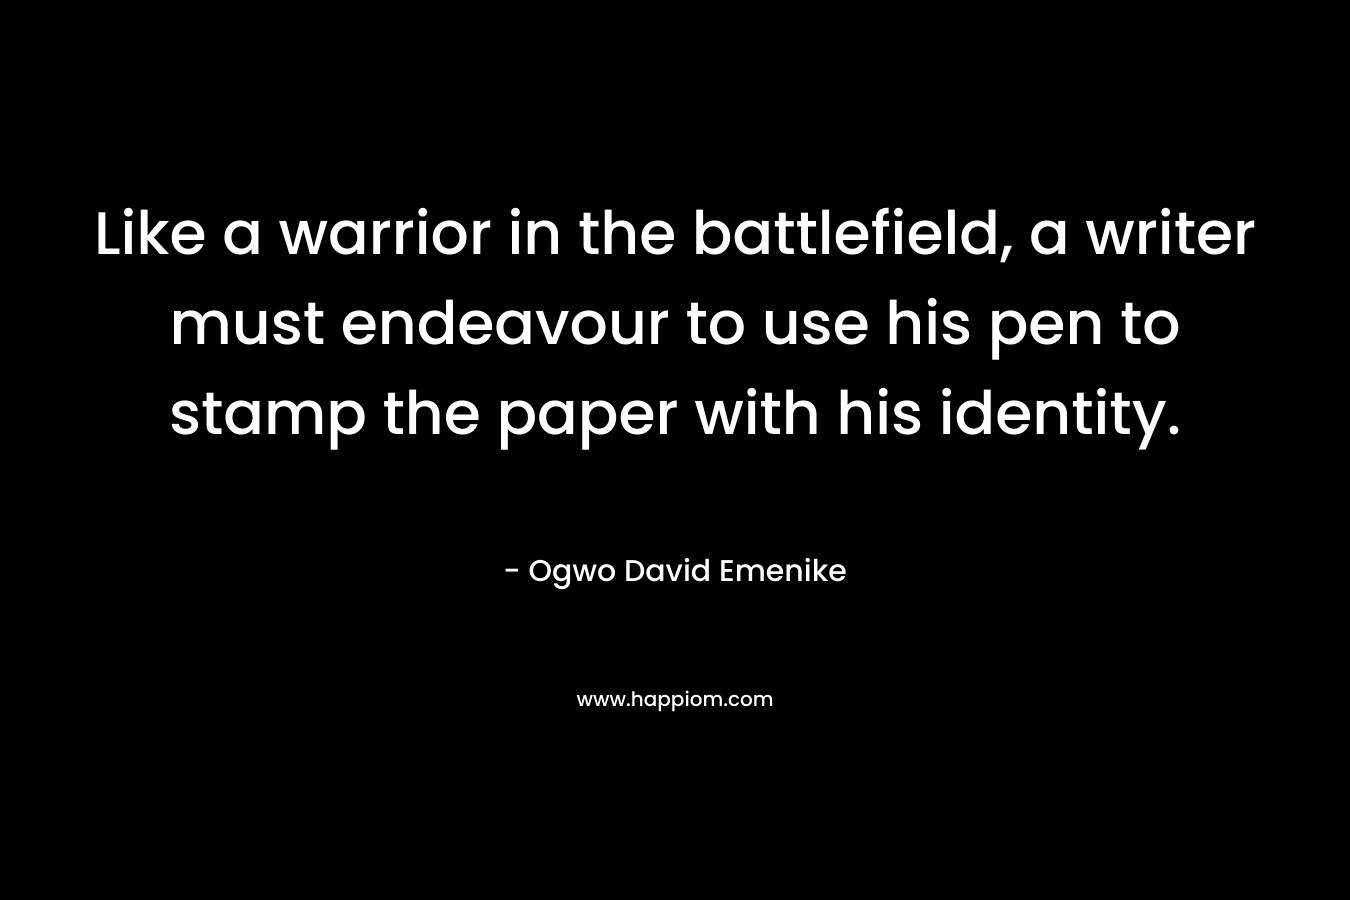 Like a warrior in the battlefield, a writer must endeavour to use his pen to stamp the paper with his identity. – Ogwo David Emenike